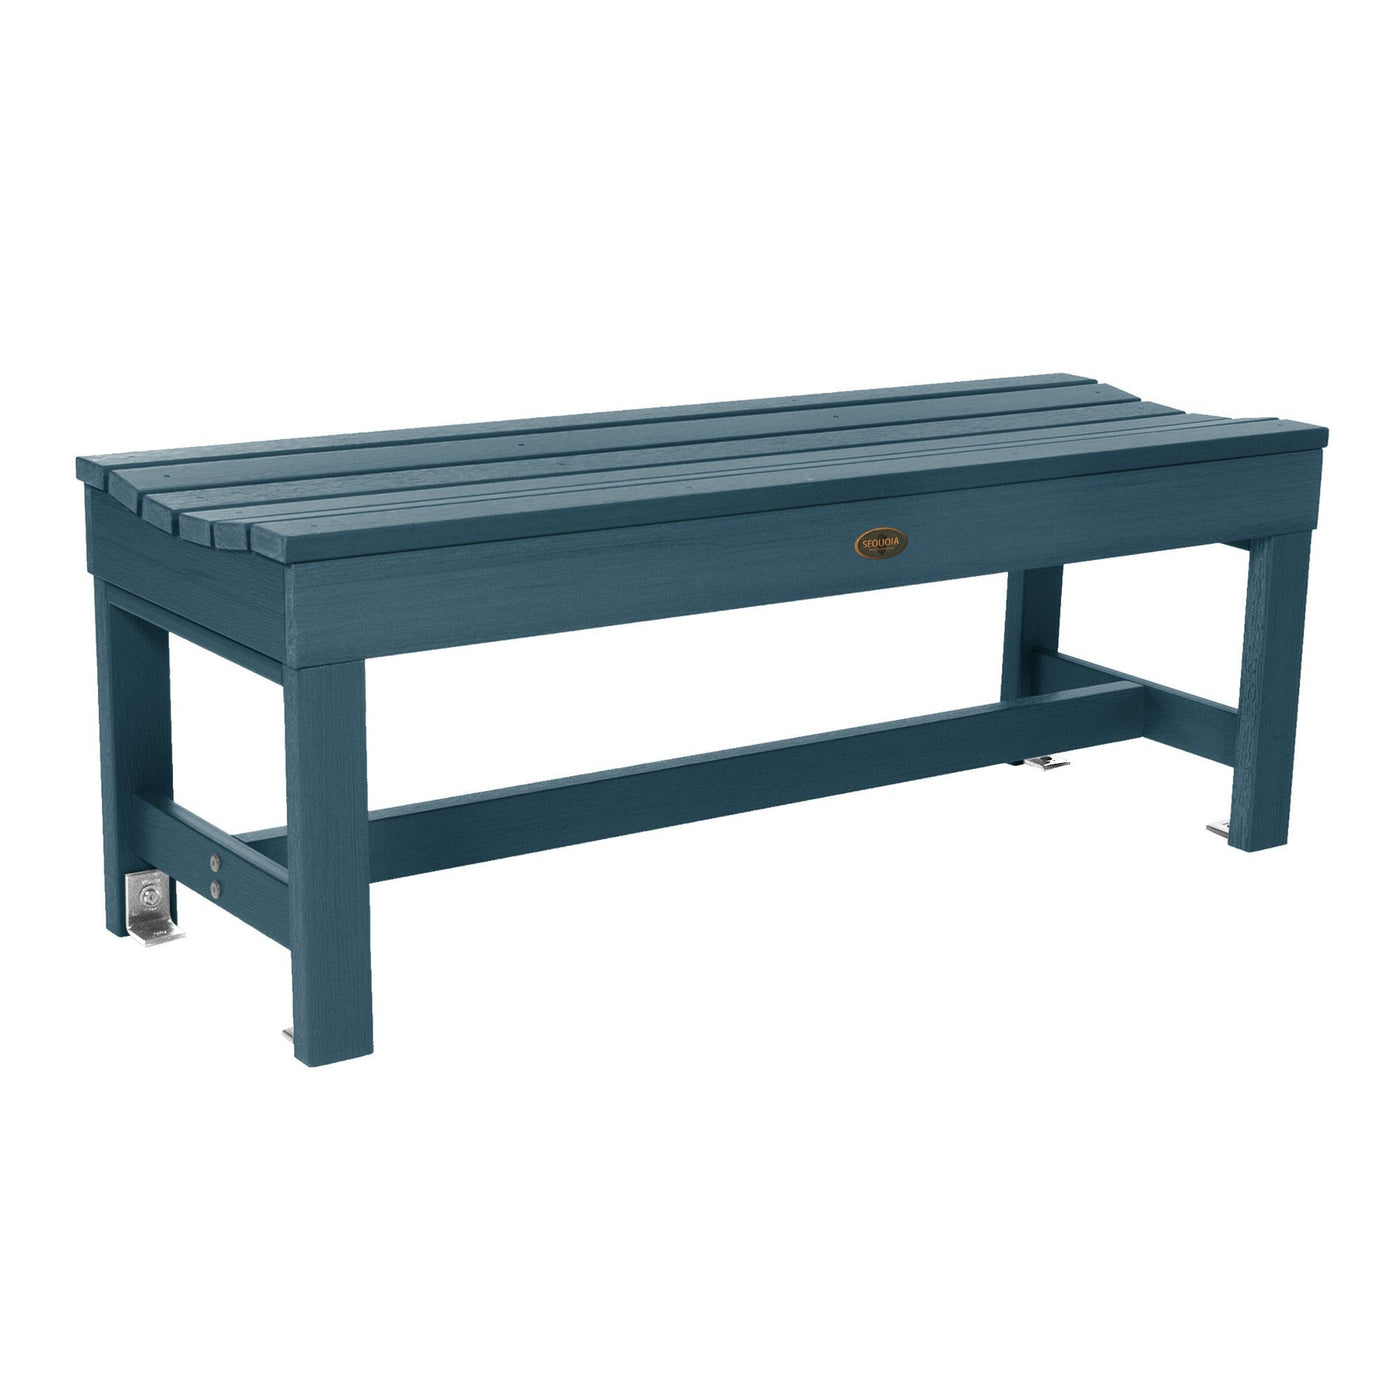 Commercial Grade "Weldon" 4ft Backless Bench Sequoia Professional Nantucket Blue 